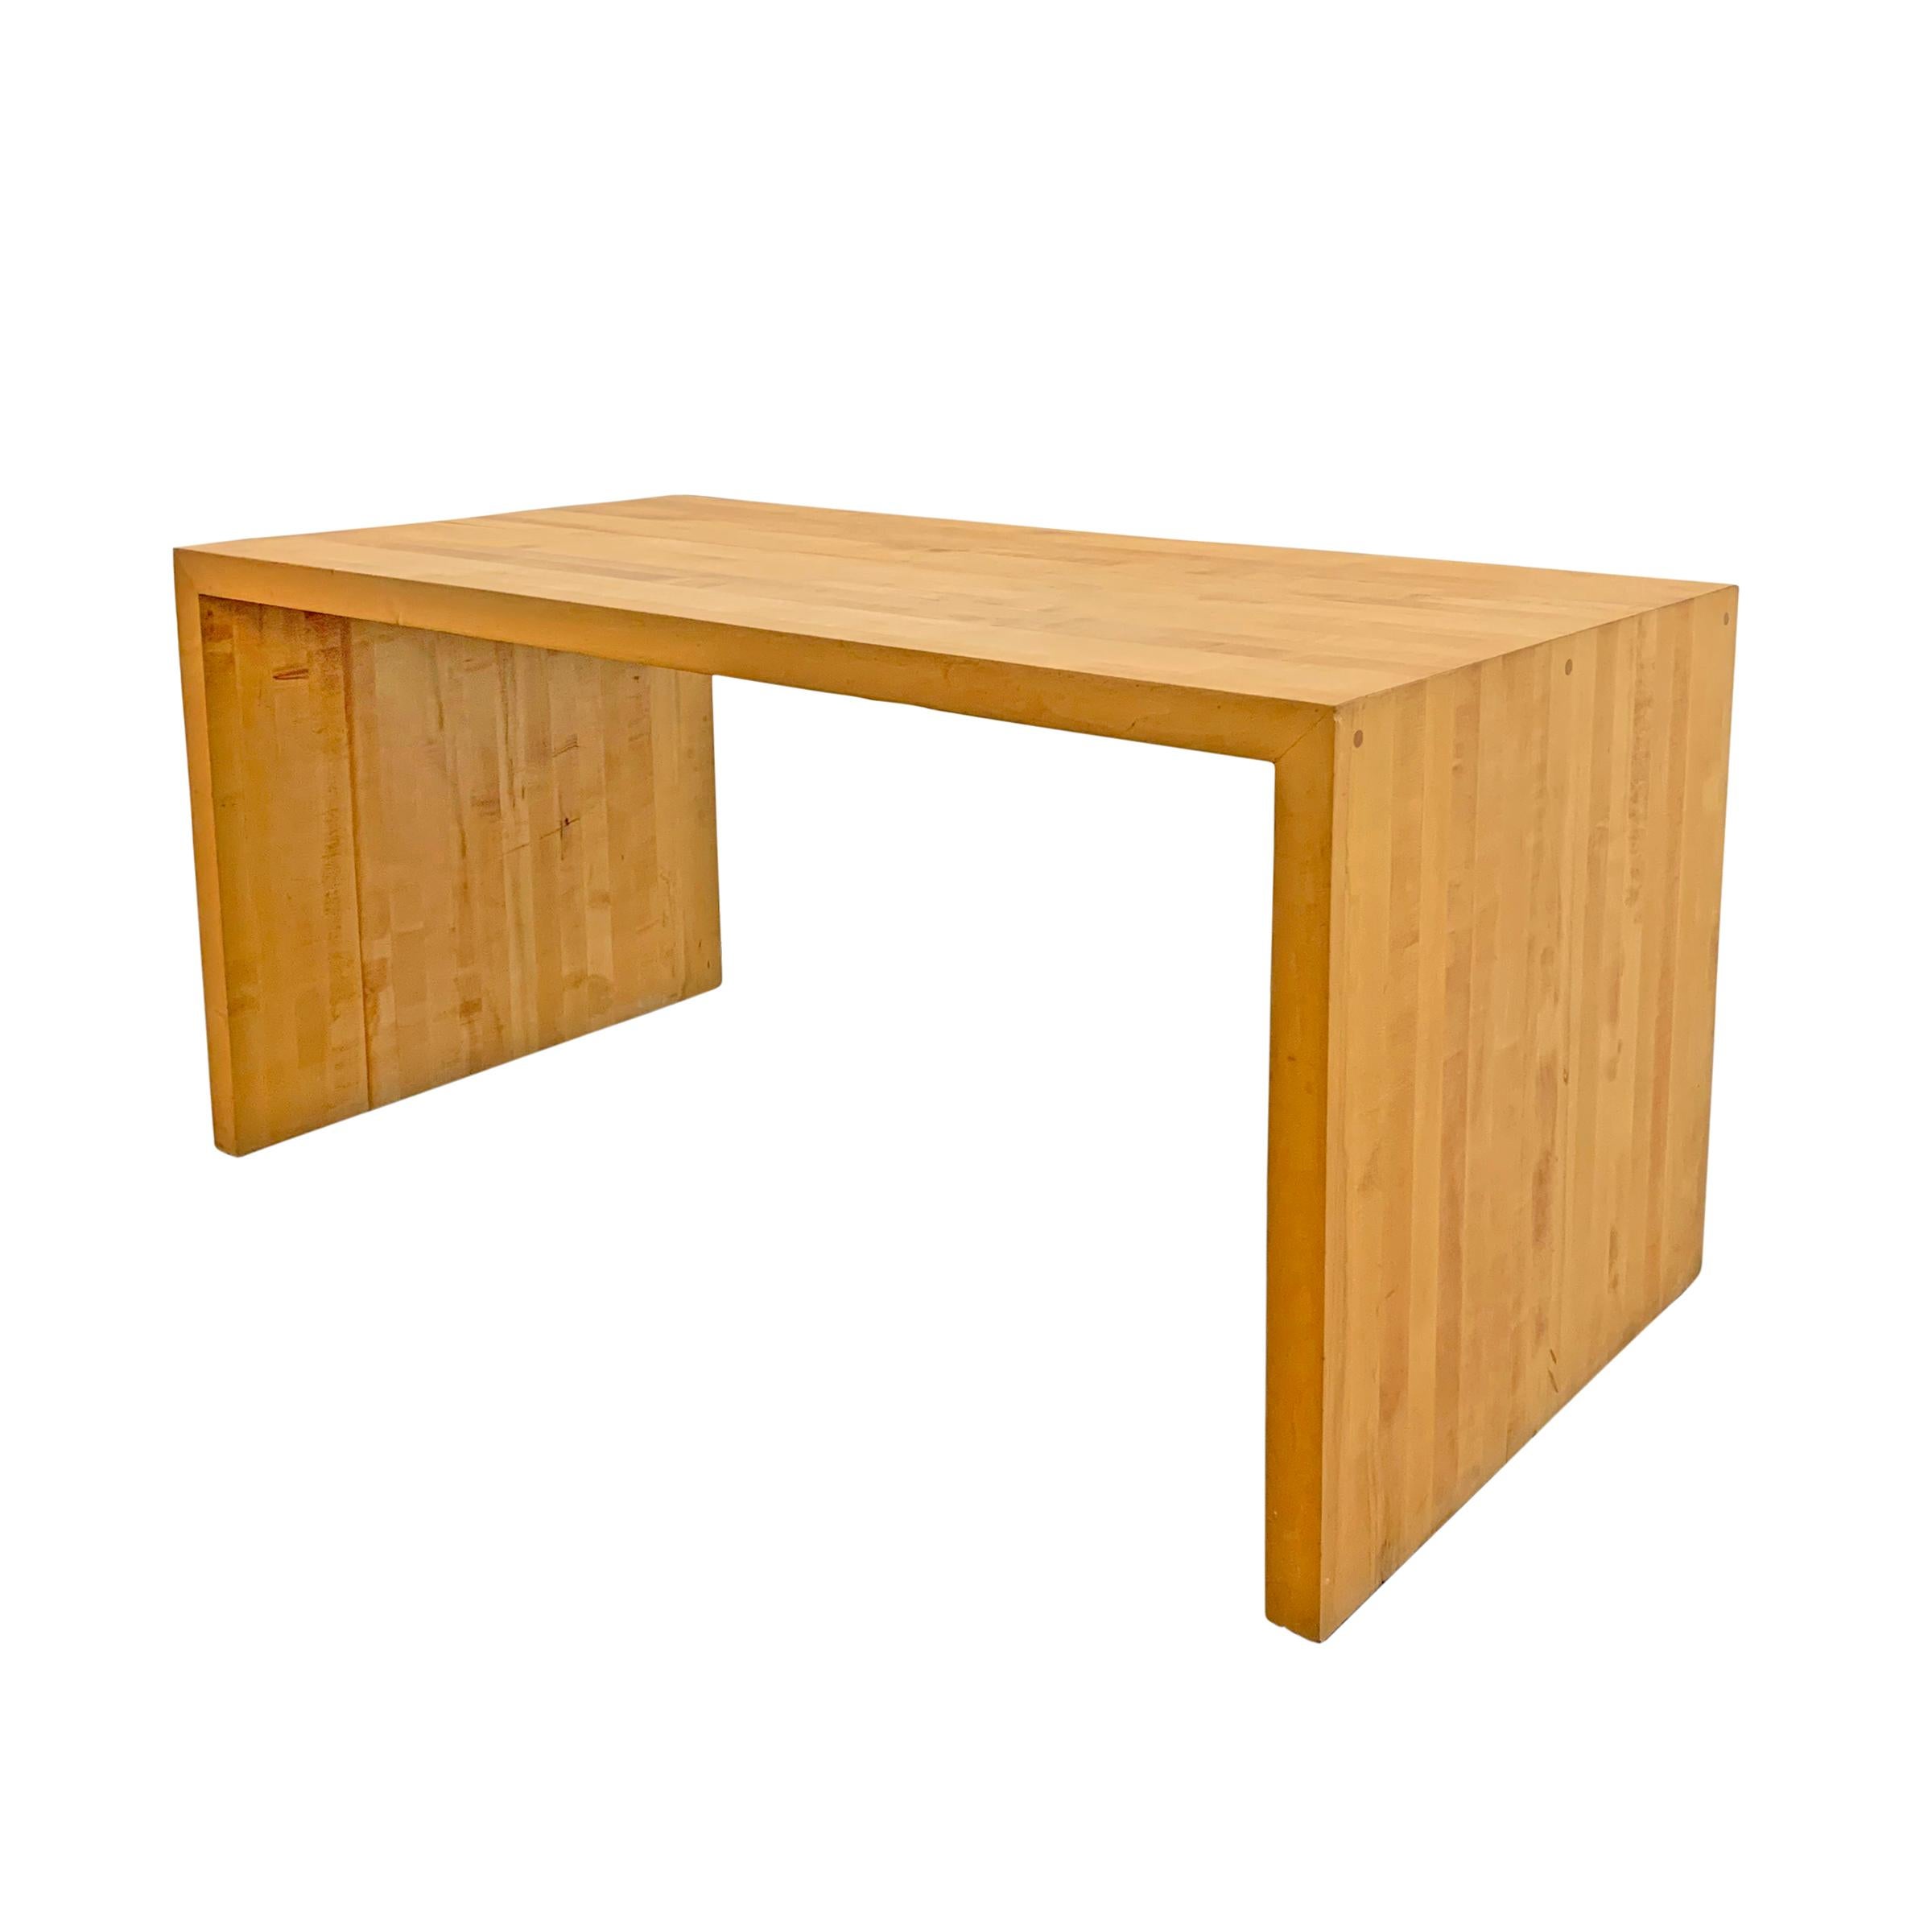 American Maple Butcher Block Parsons Table In Good Condition For Sale In Chicago, IL